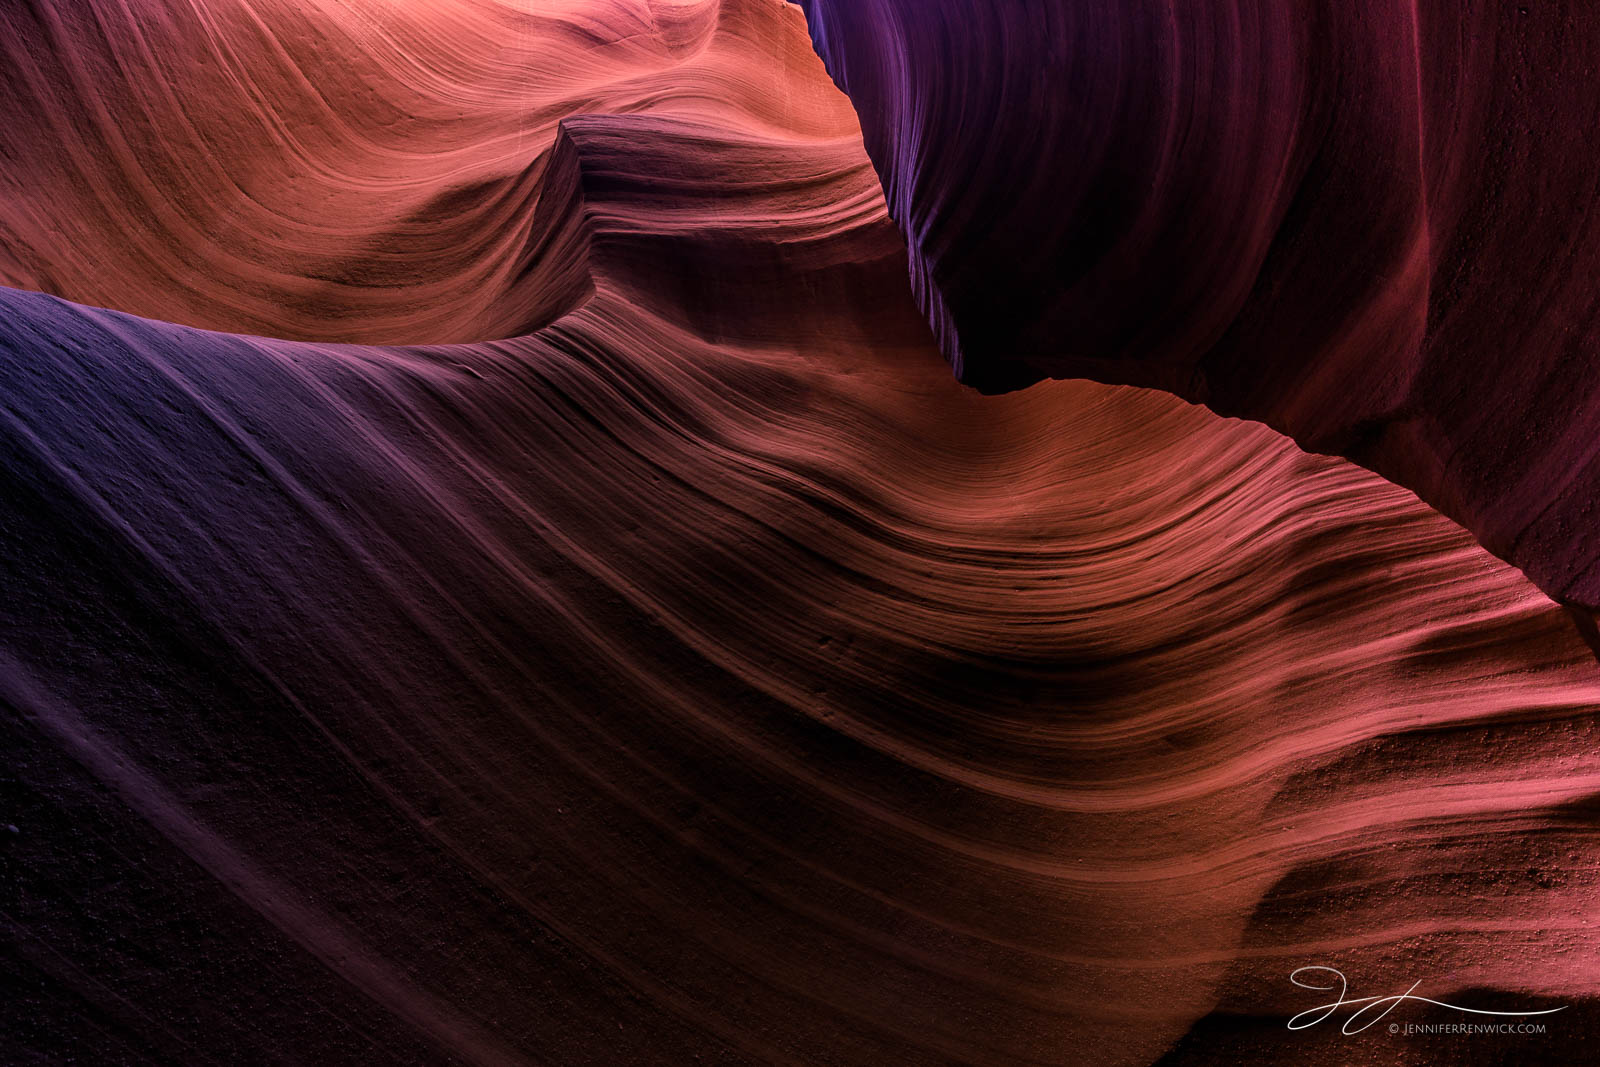 Colors, textures, and light paint the corner of a slot canyon.